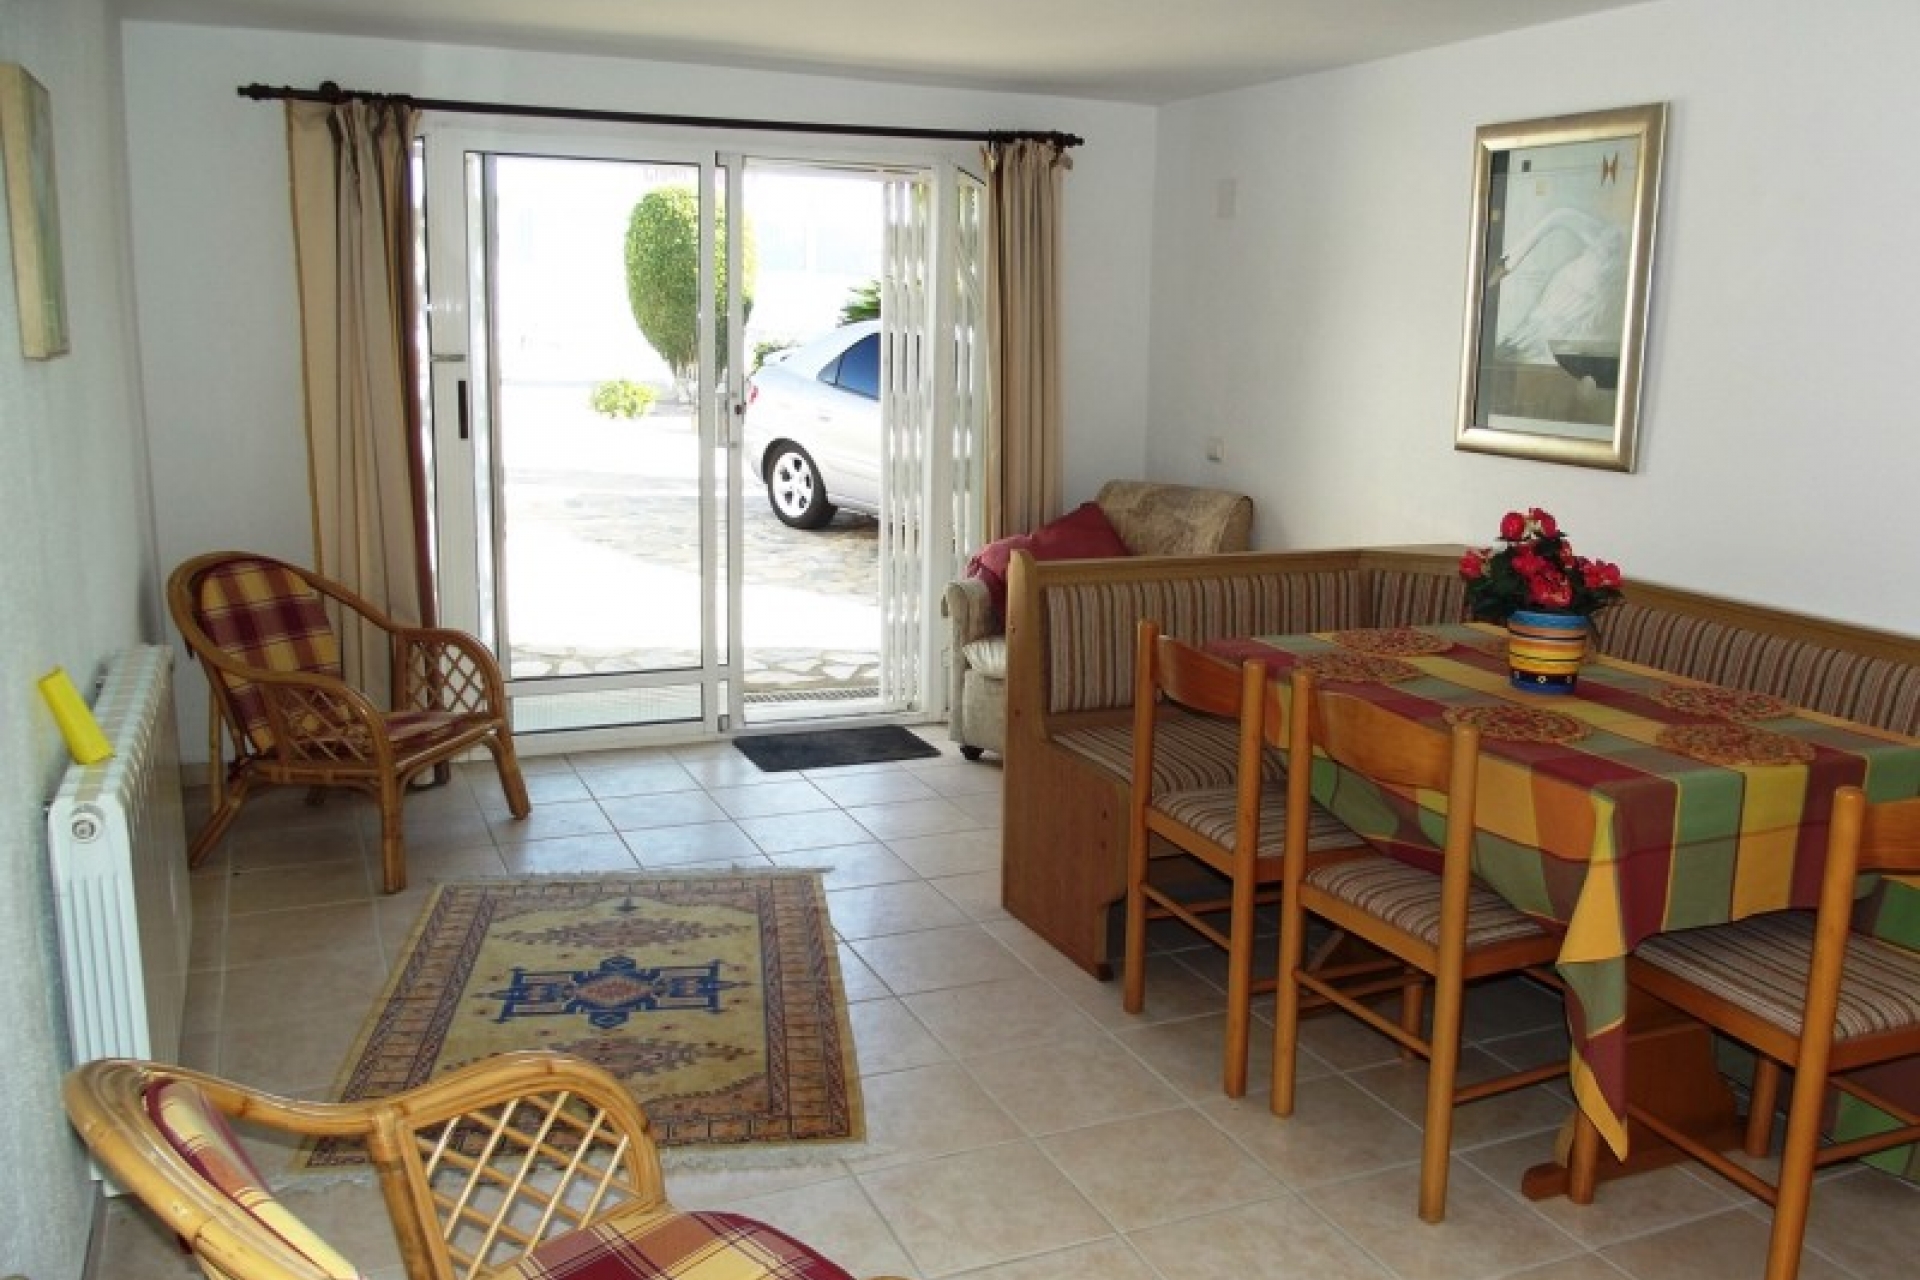 Cheap bargain property for sale Spain costa blanca 